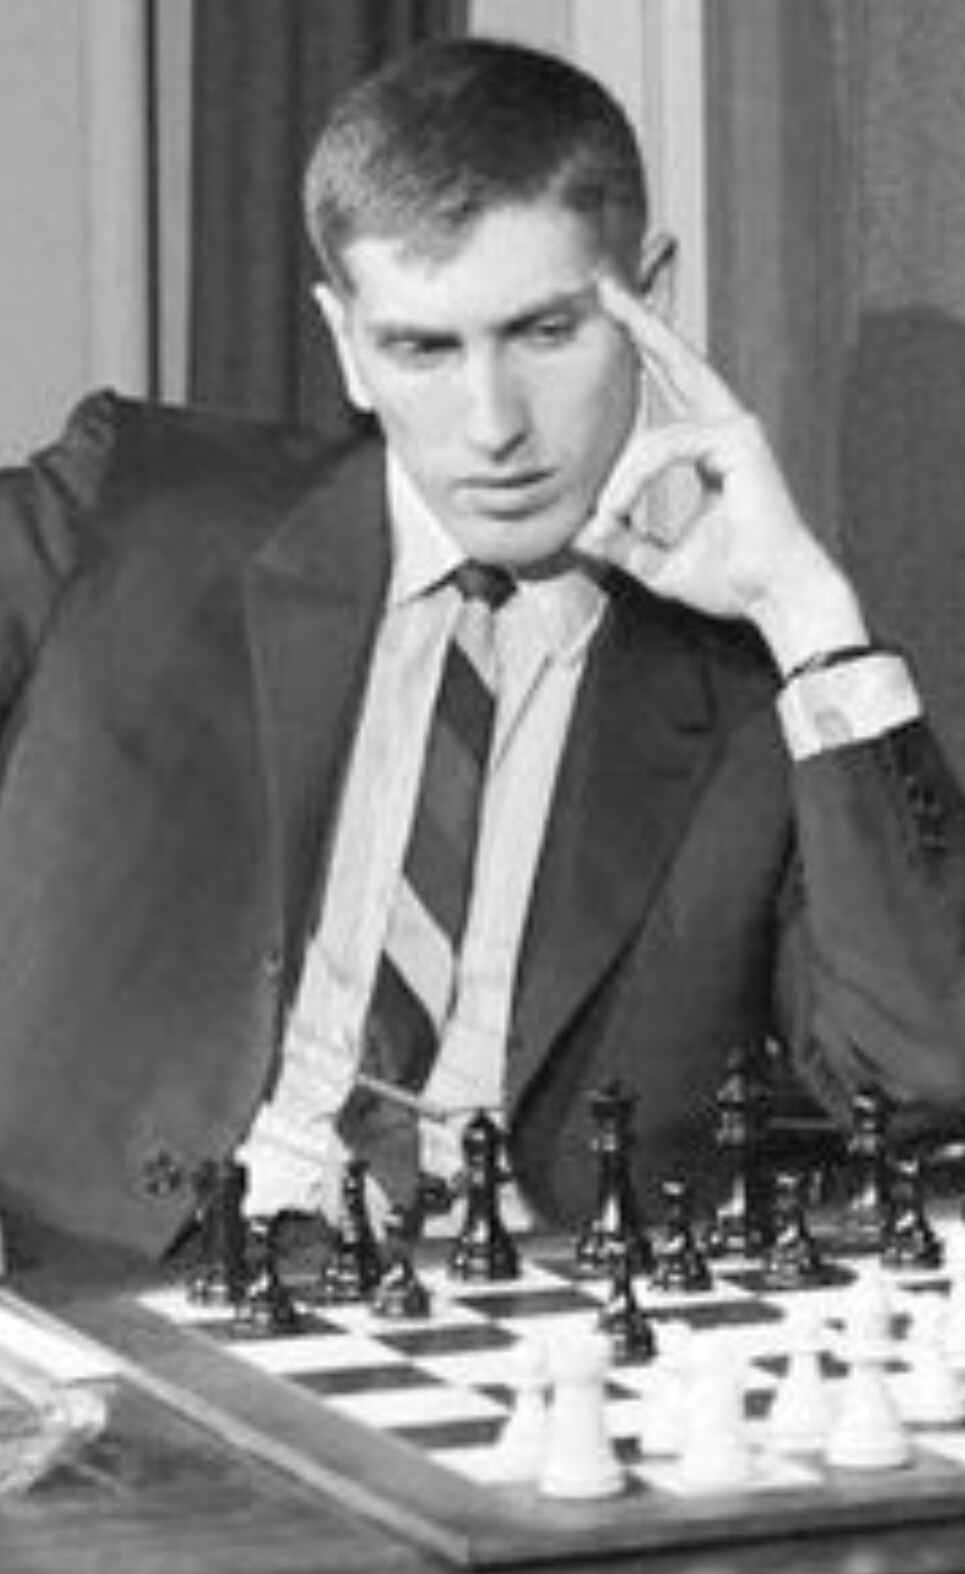 Who is your favorite chess player from the past? - Quora